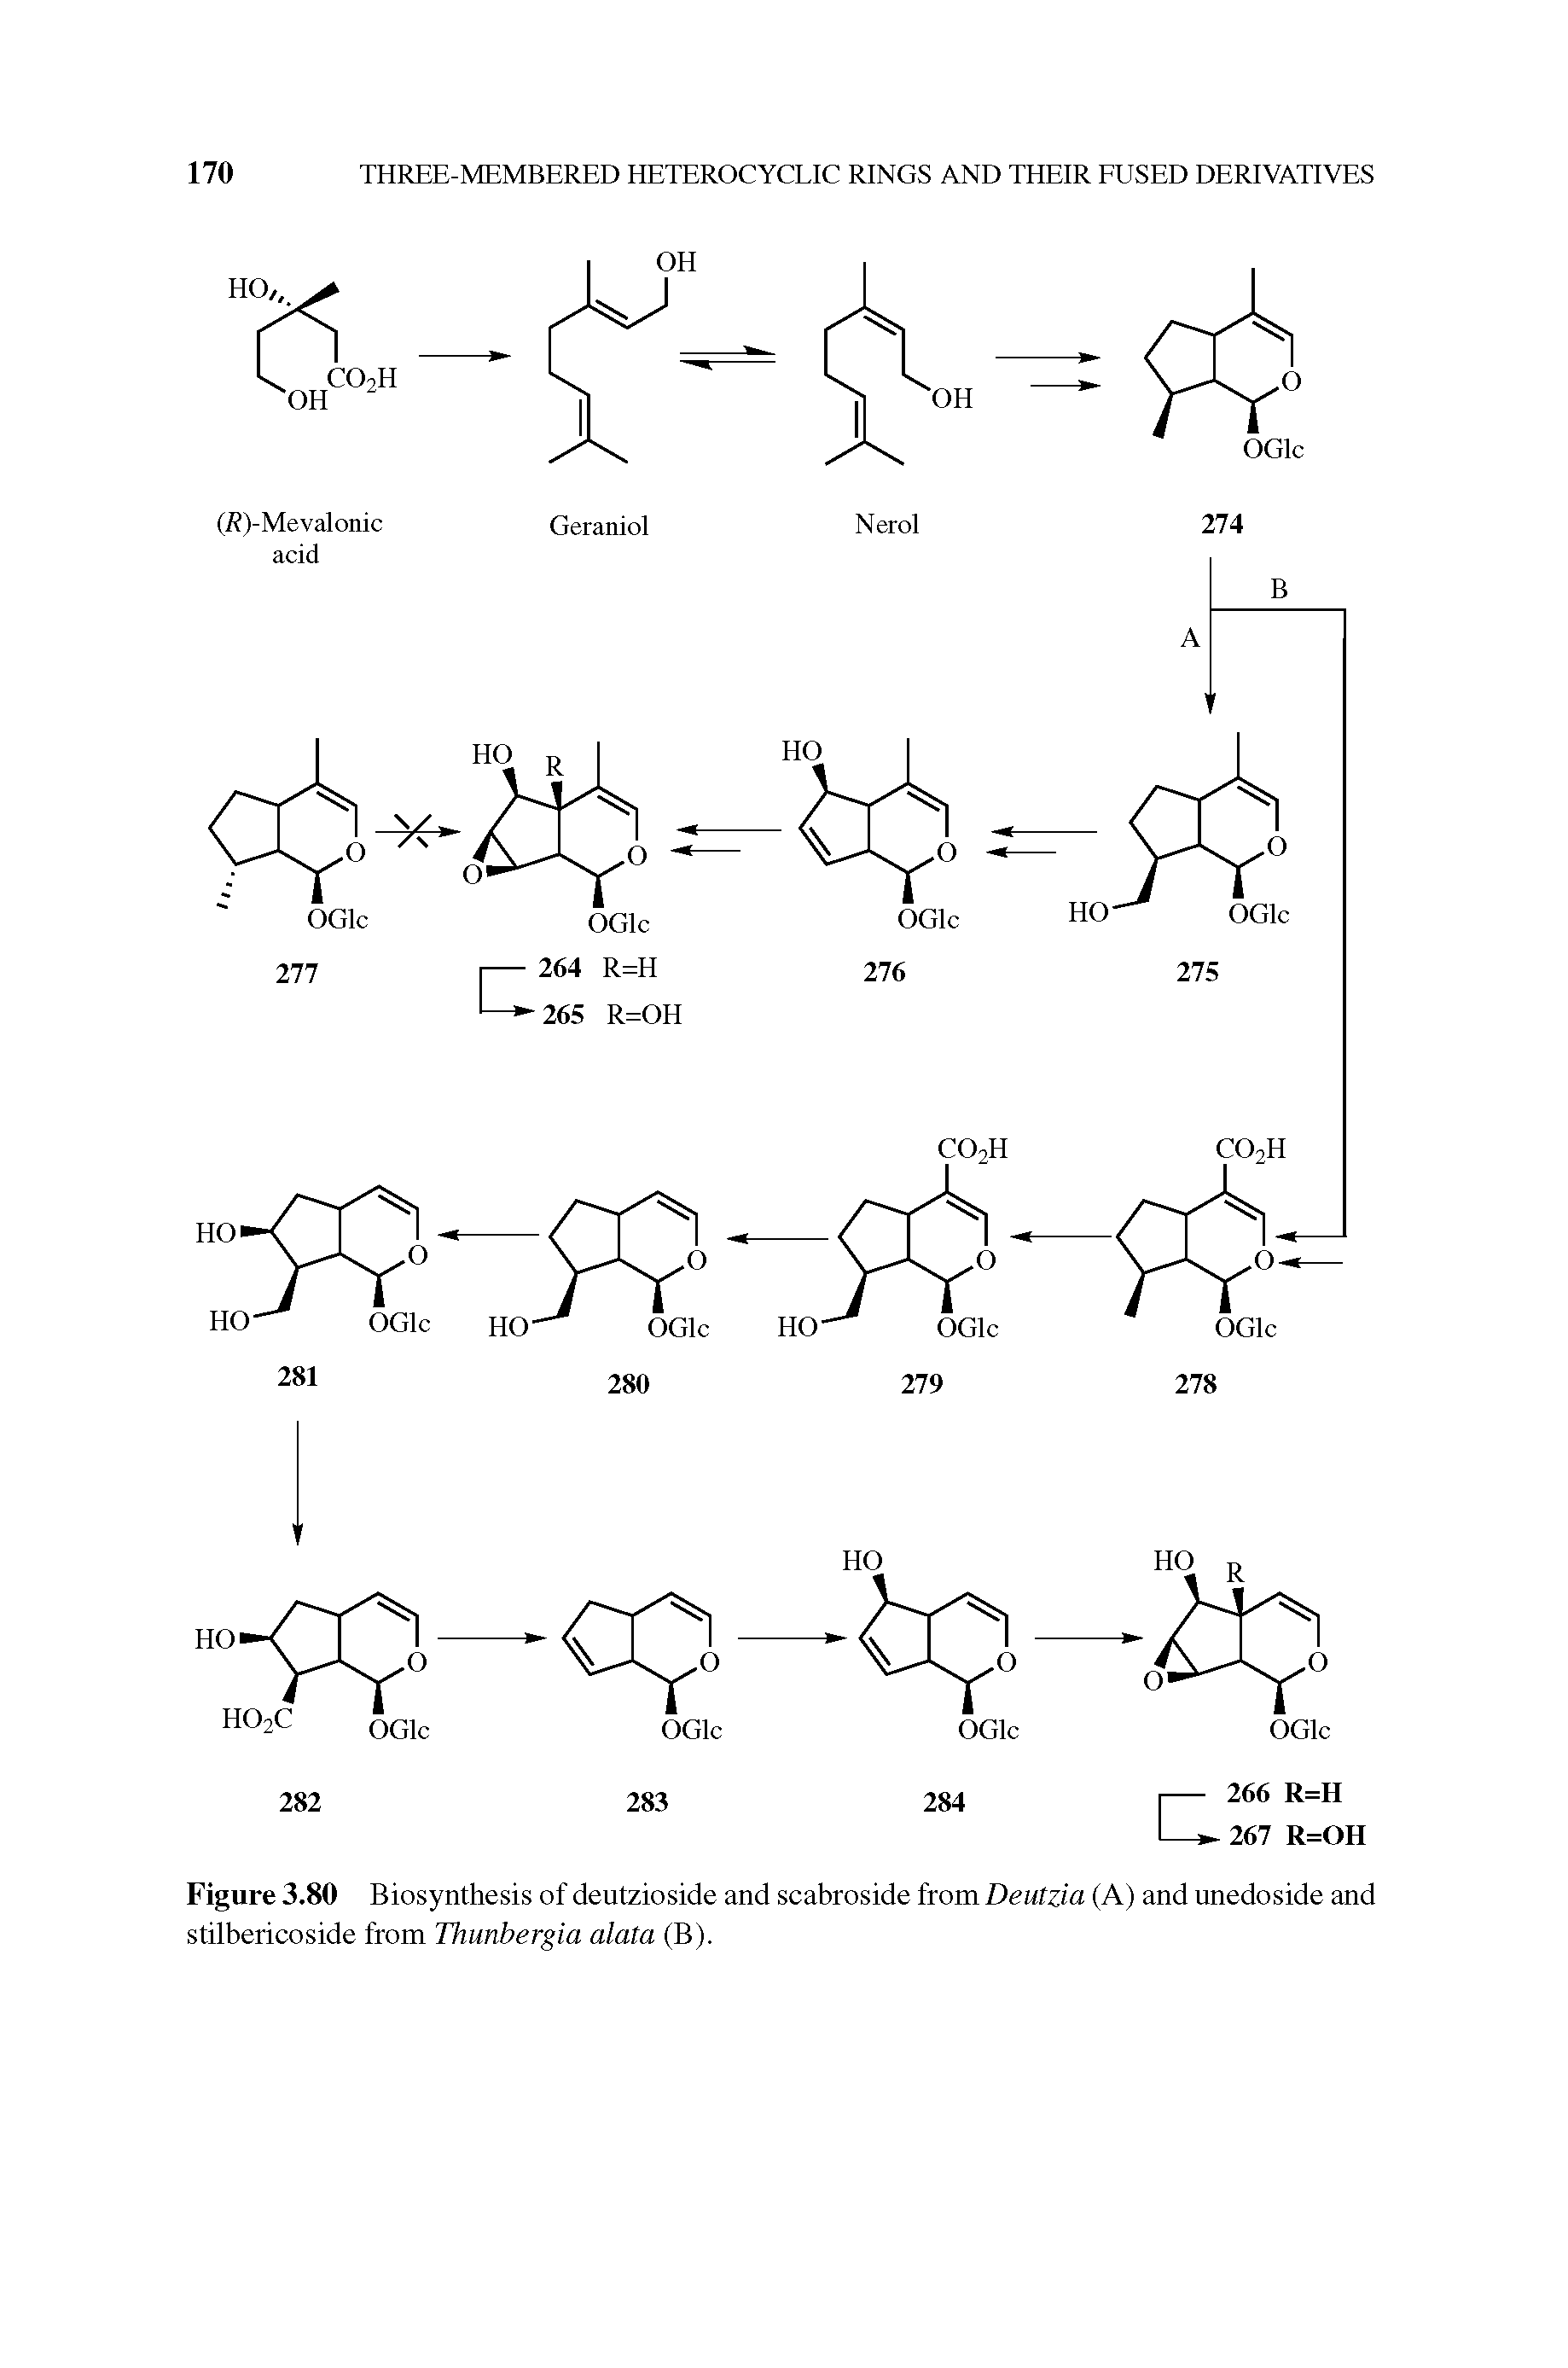 Figure 3.80 Biosynthesis of deutzioside and scabroside from Deutzia (A) and unedoside and stilbericoside from Thunbergia alata (B).